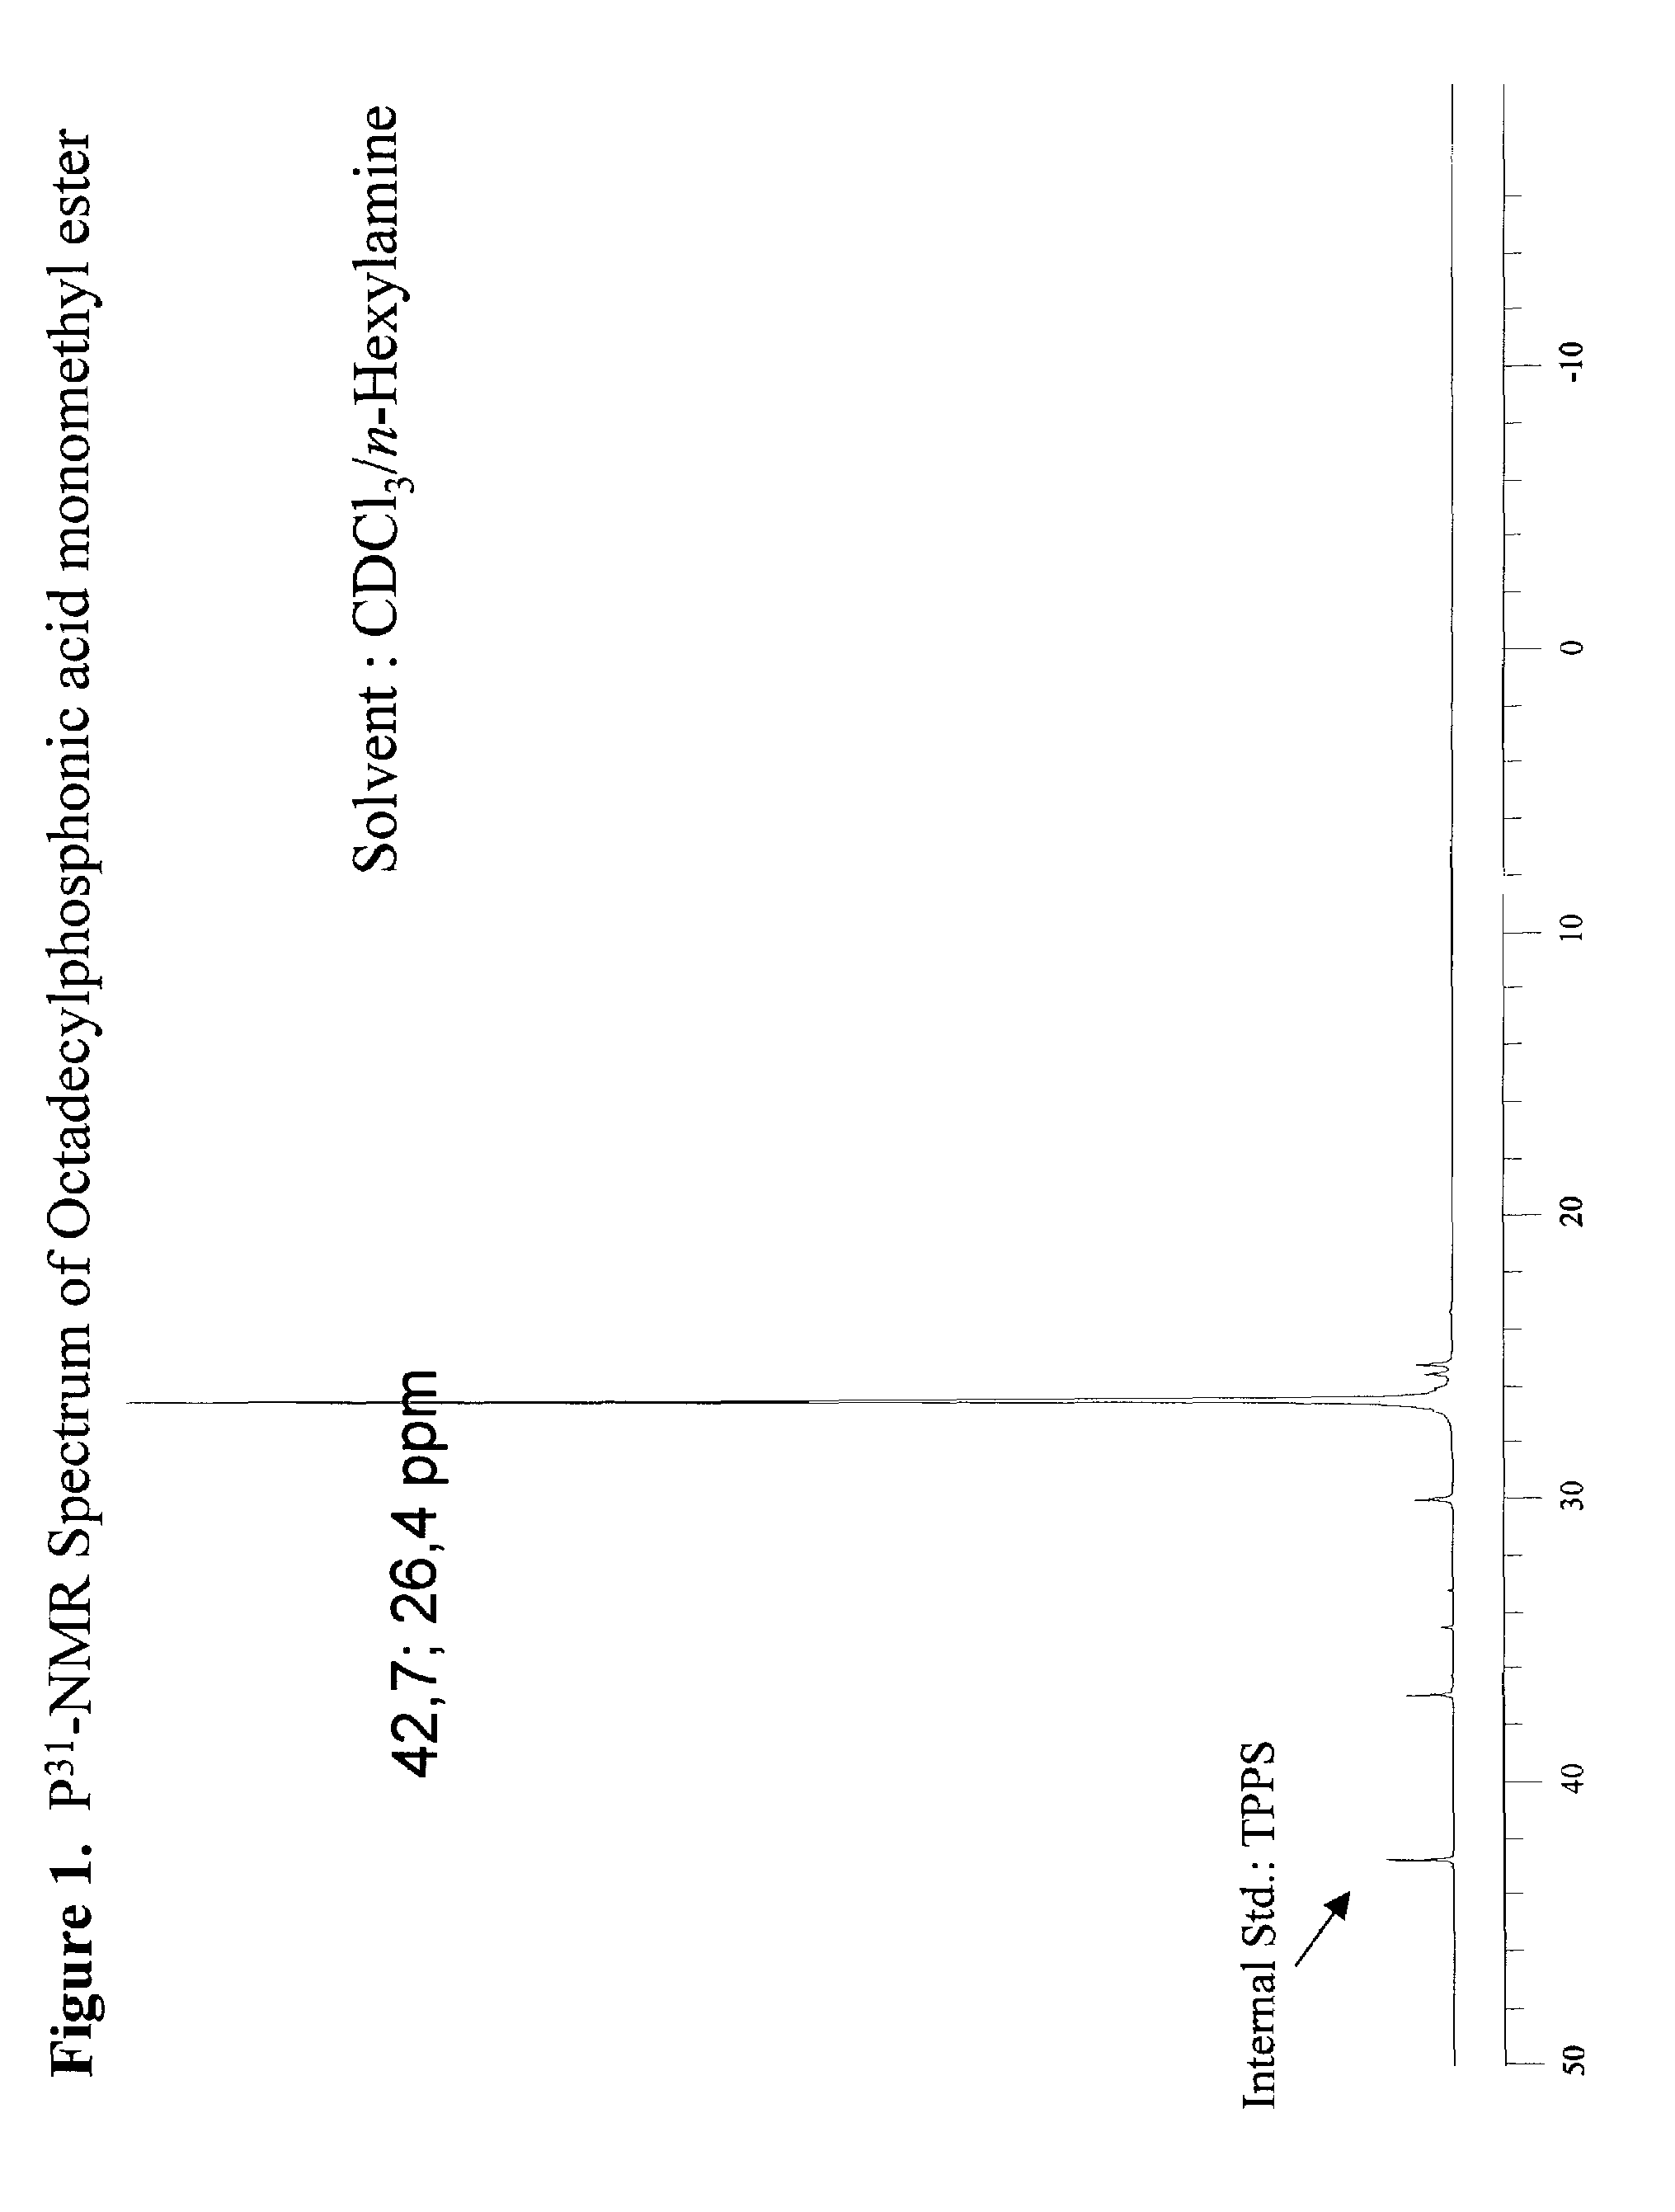 Process for manufacturing alkylphosphonate monoesters